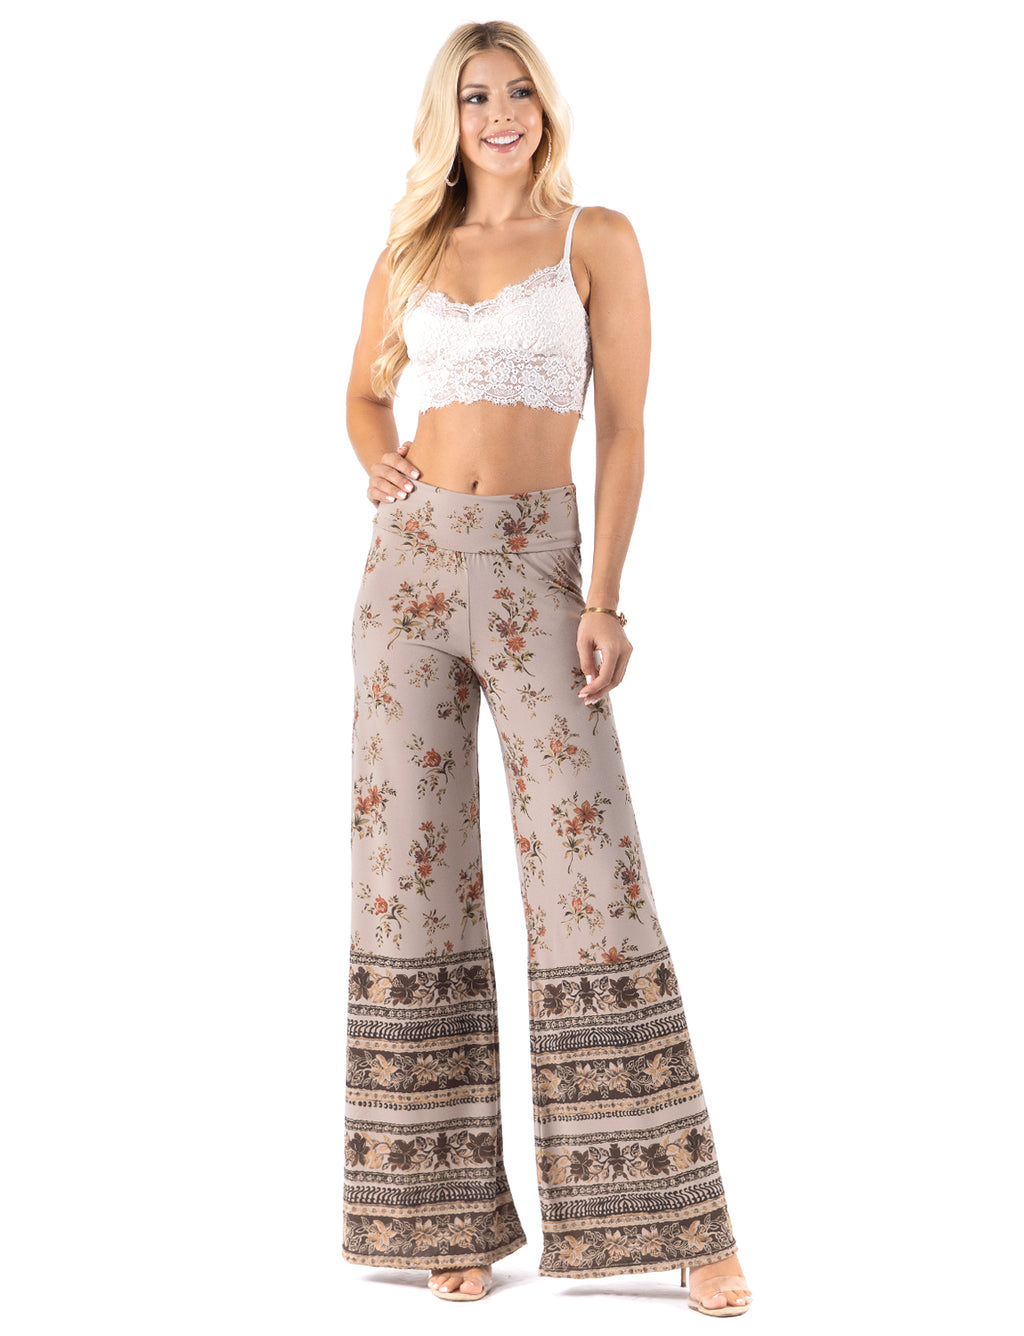 Light Tan Floral High waist palazzo pants featuring wide legs, and a comfortable stretchy fabric Perfect for any activity,relaxing day,beautiful and unique